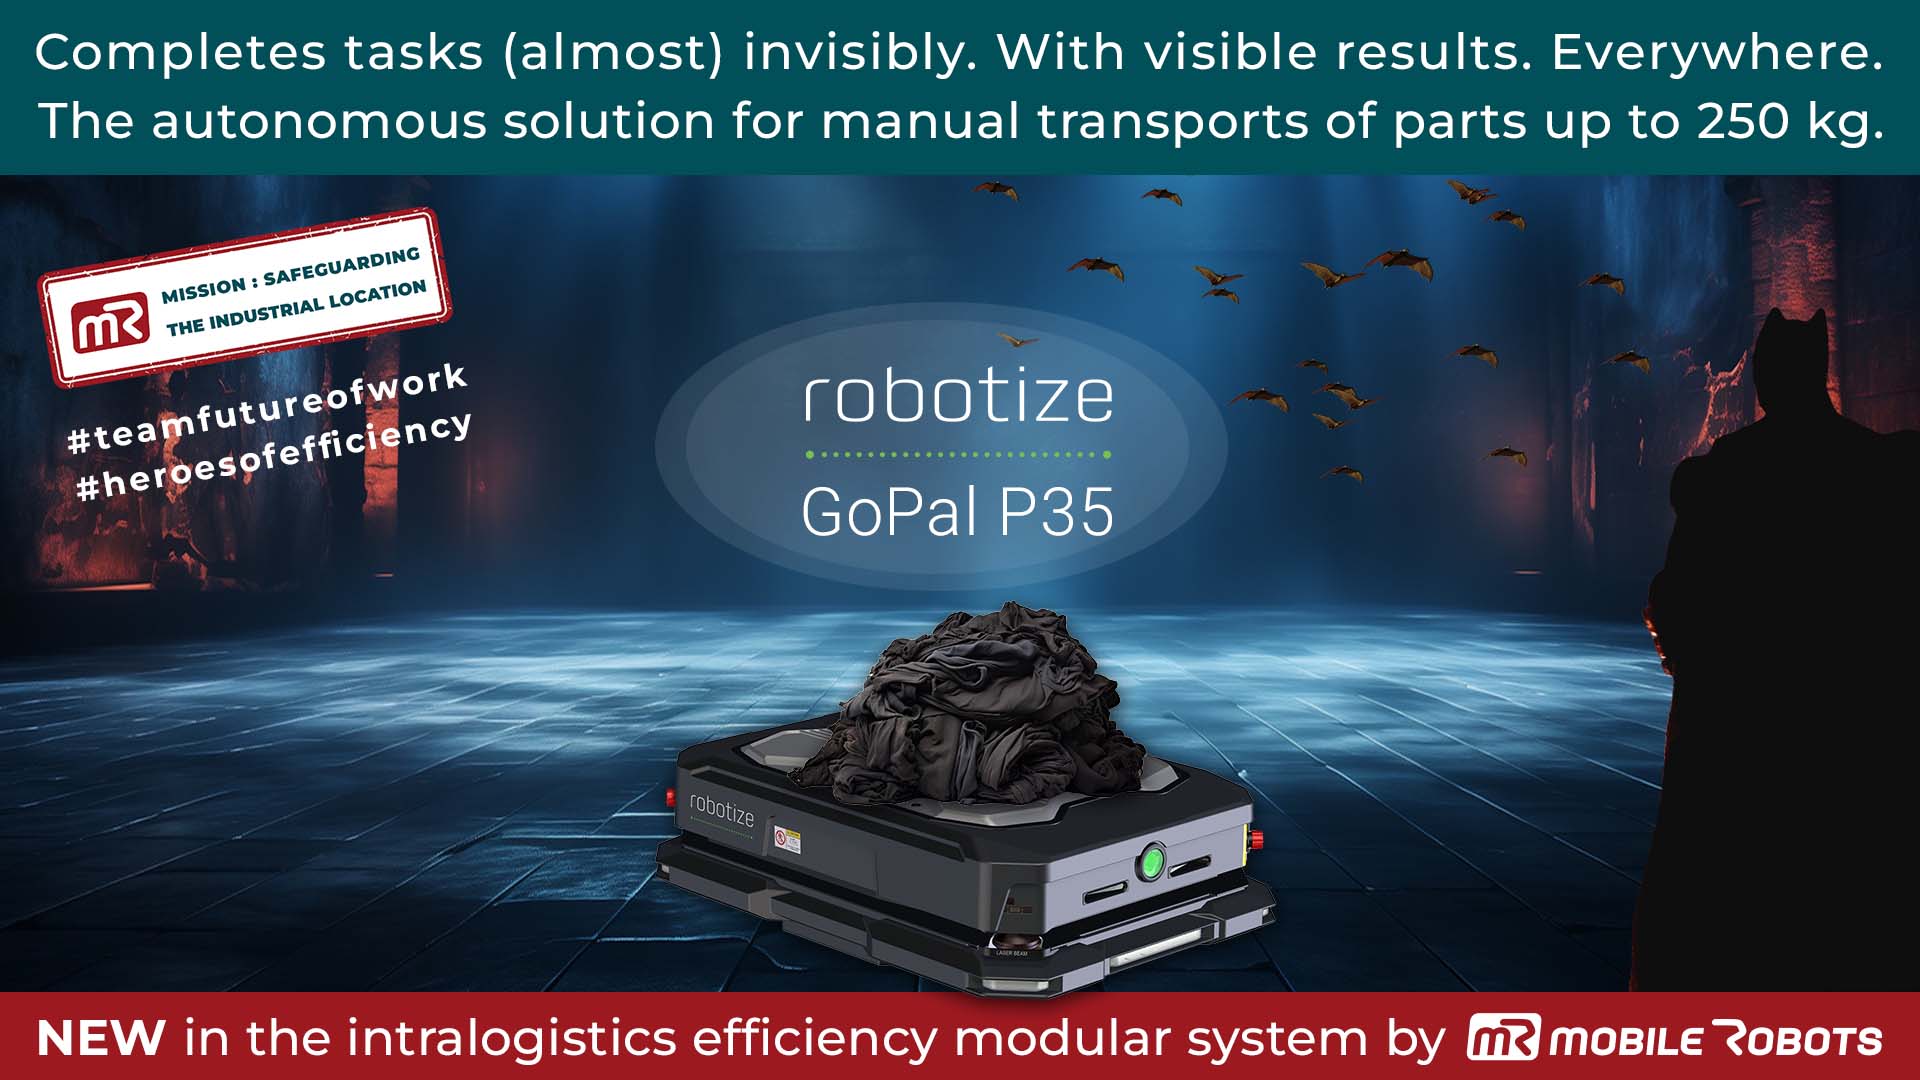 New from your integrator mR MOBILE ROBOTS: The Robotize GoPal P35 opens up new perspectives for your autonomous intralogistics.